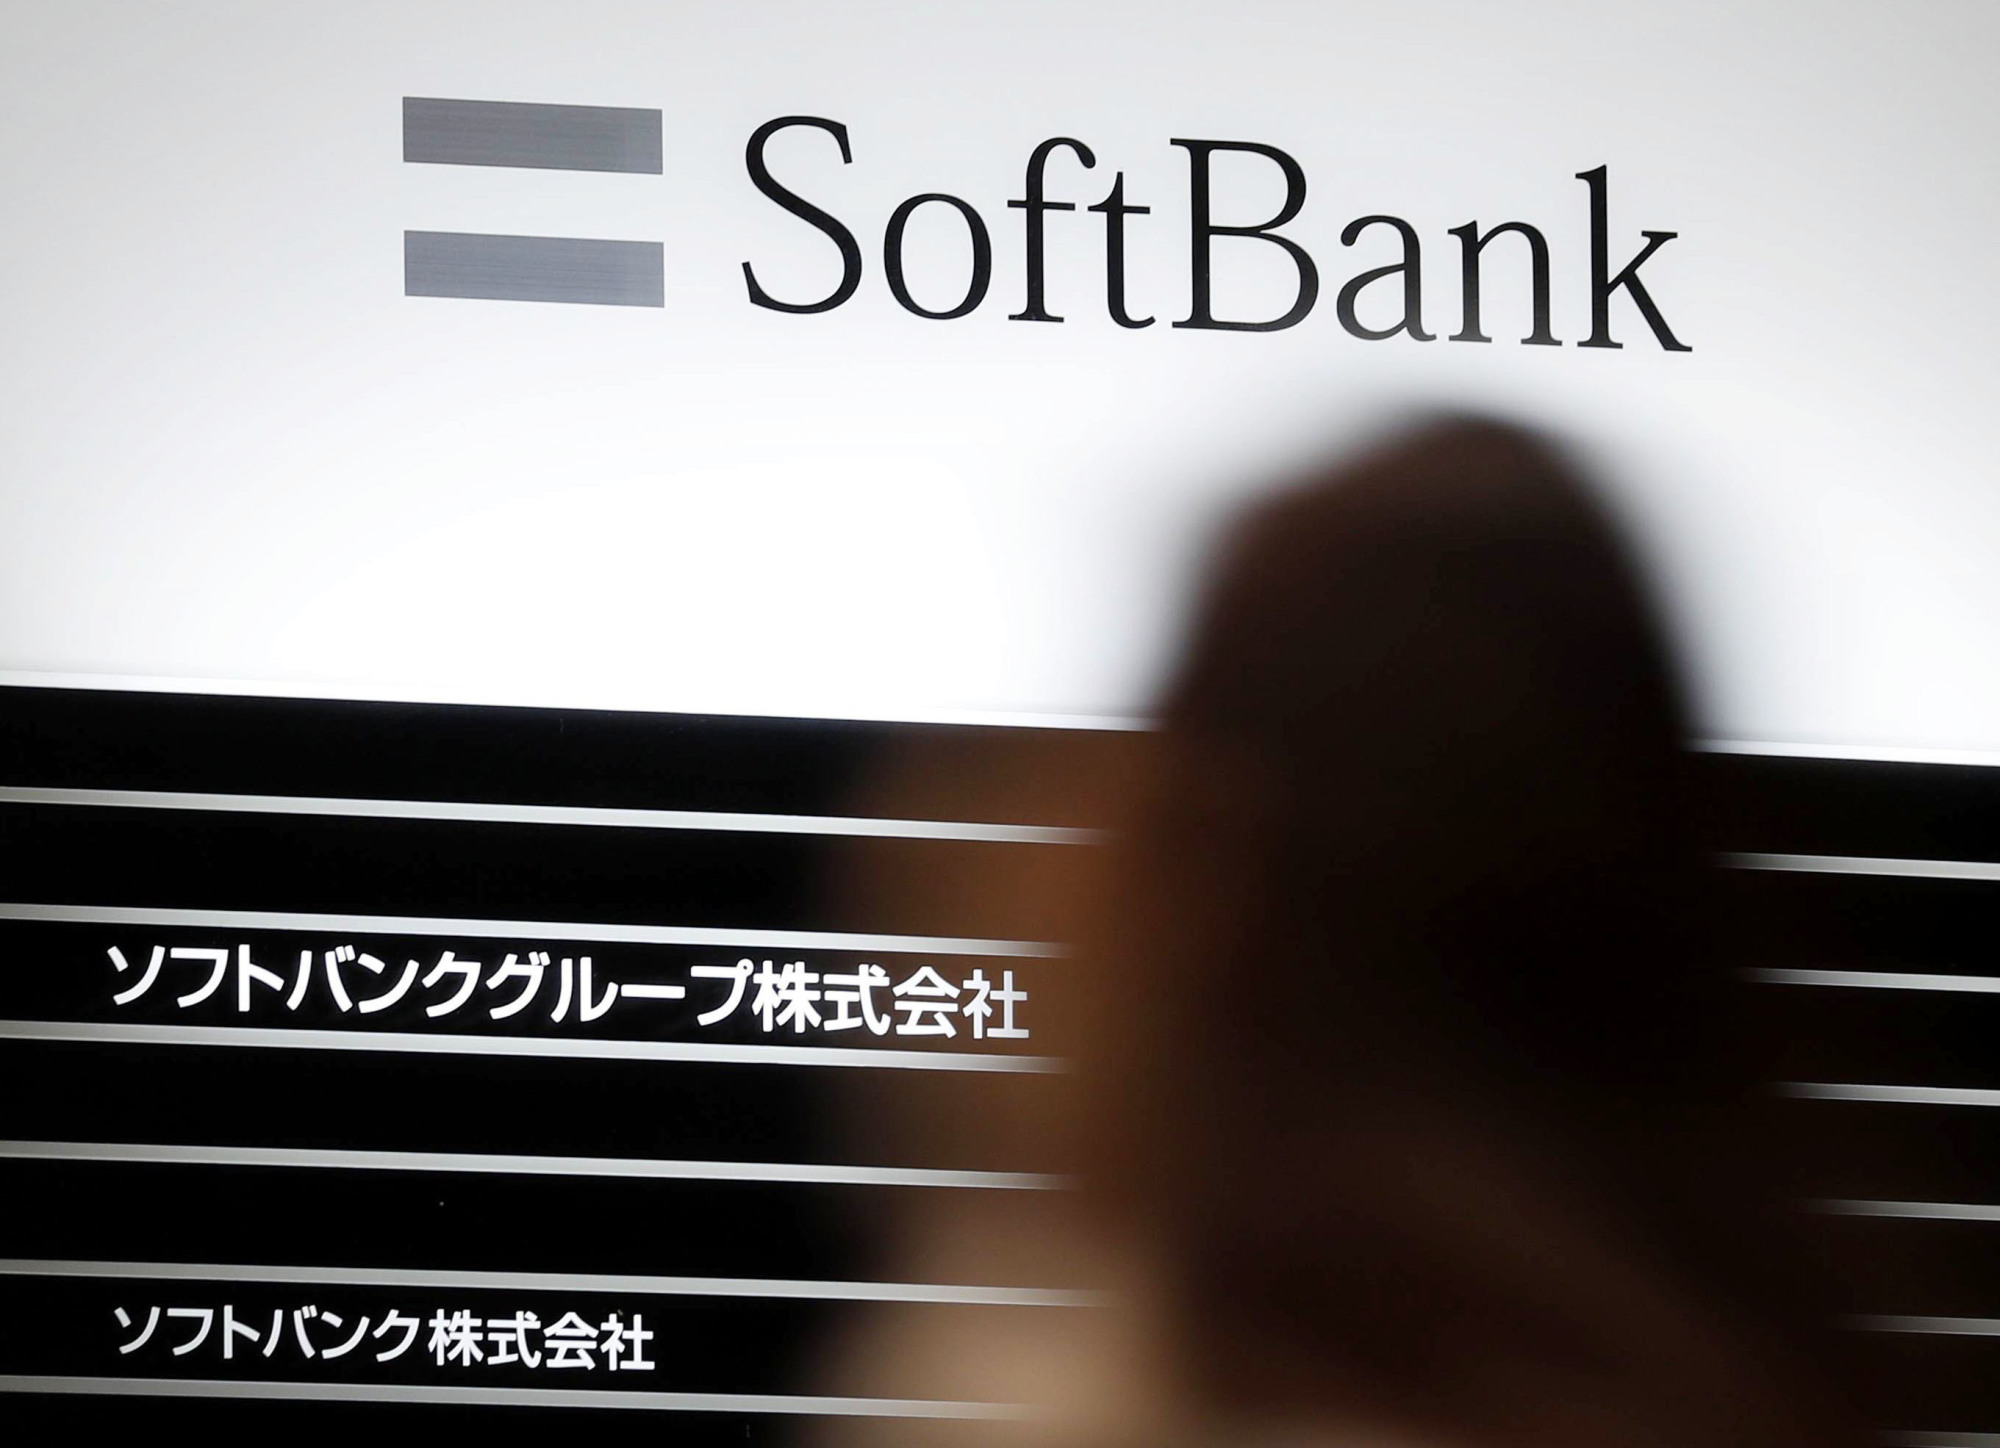 Latin America continues to be SoftBank Group Corp.'s investment target this year, according to the head of SoftBank's Southern Cone region. | KYODO